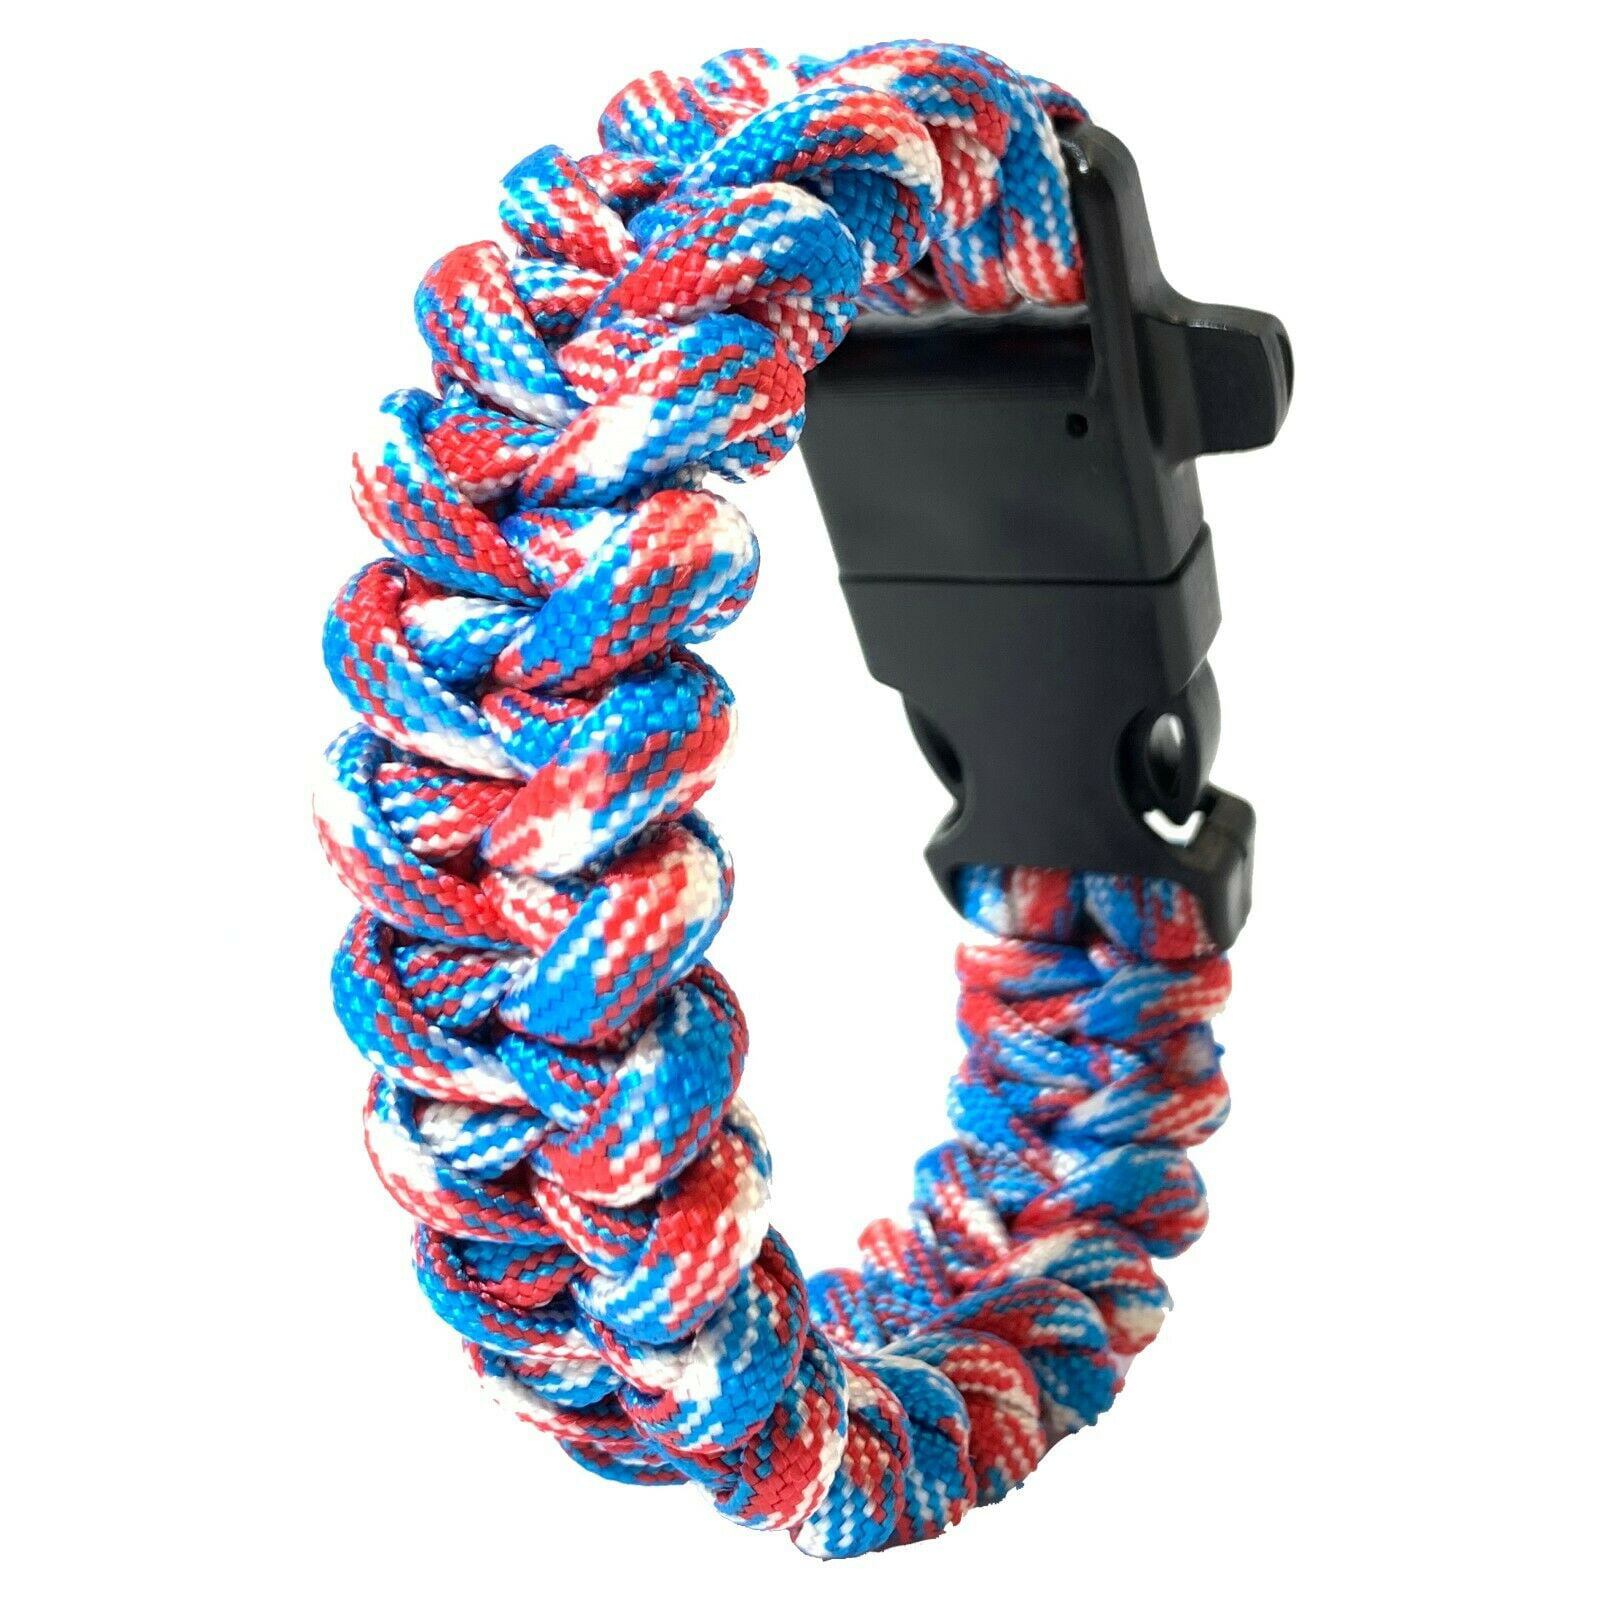 Survival BraceletTactical Paracord Bracelet with Forged Stainless Steel  UType Shackle Connection ThreeHoles AdjustableBearable 550 lb  Disassembled Parachute Rope for Emergency  Walmartcom